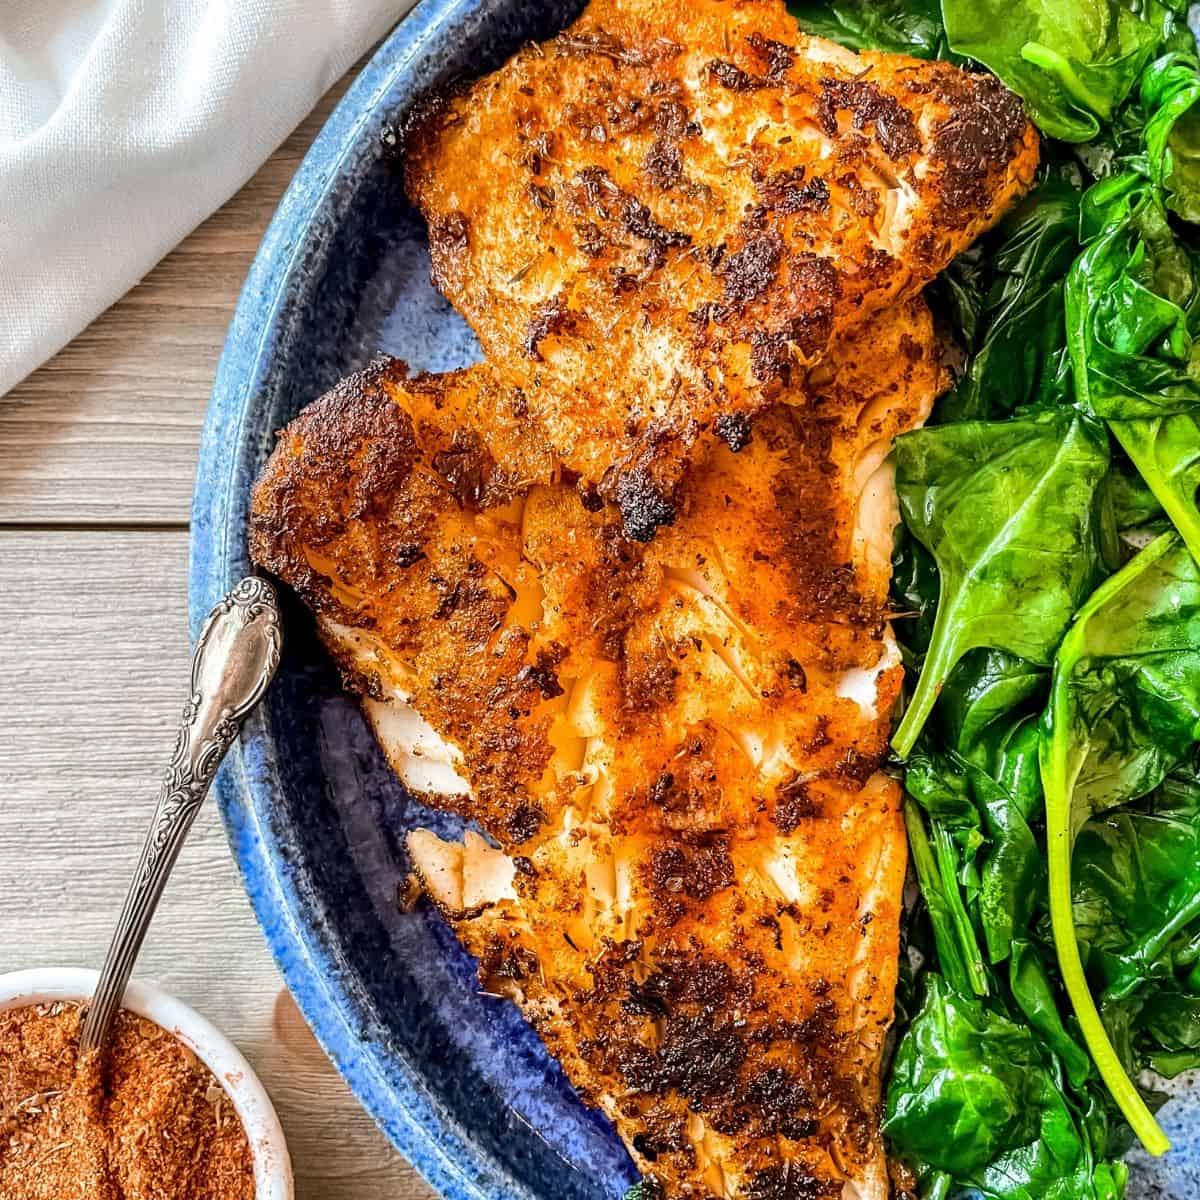 Blackened cod fillets on a round, blue plate, served with sautéed spinach. Blackening seasoning in the bottom left corner with a spoon. Top left corner has a white napkin.